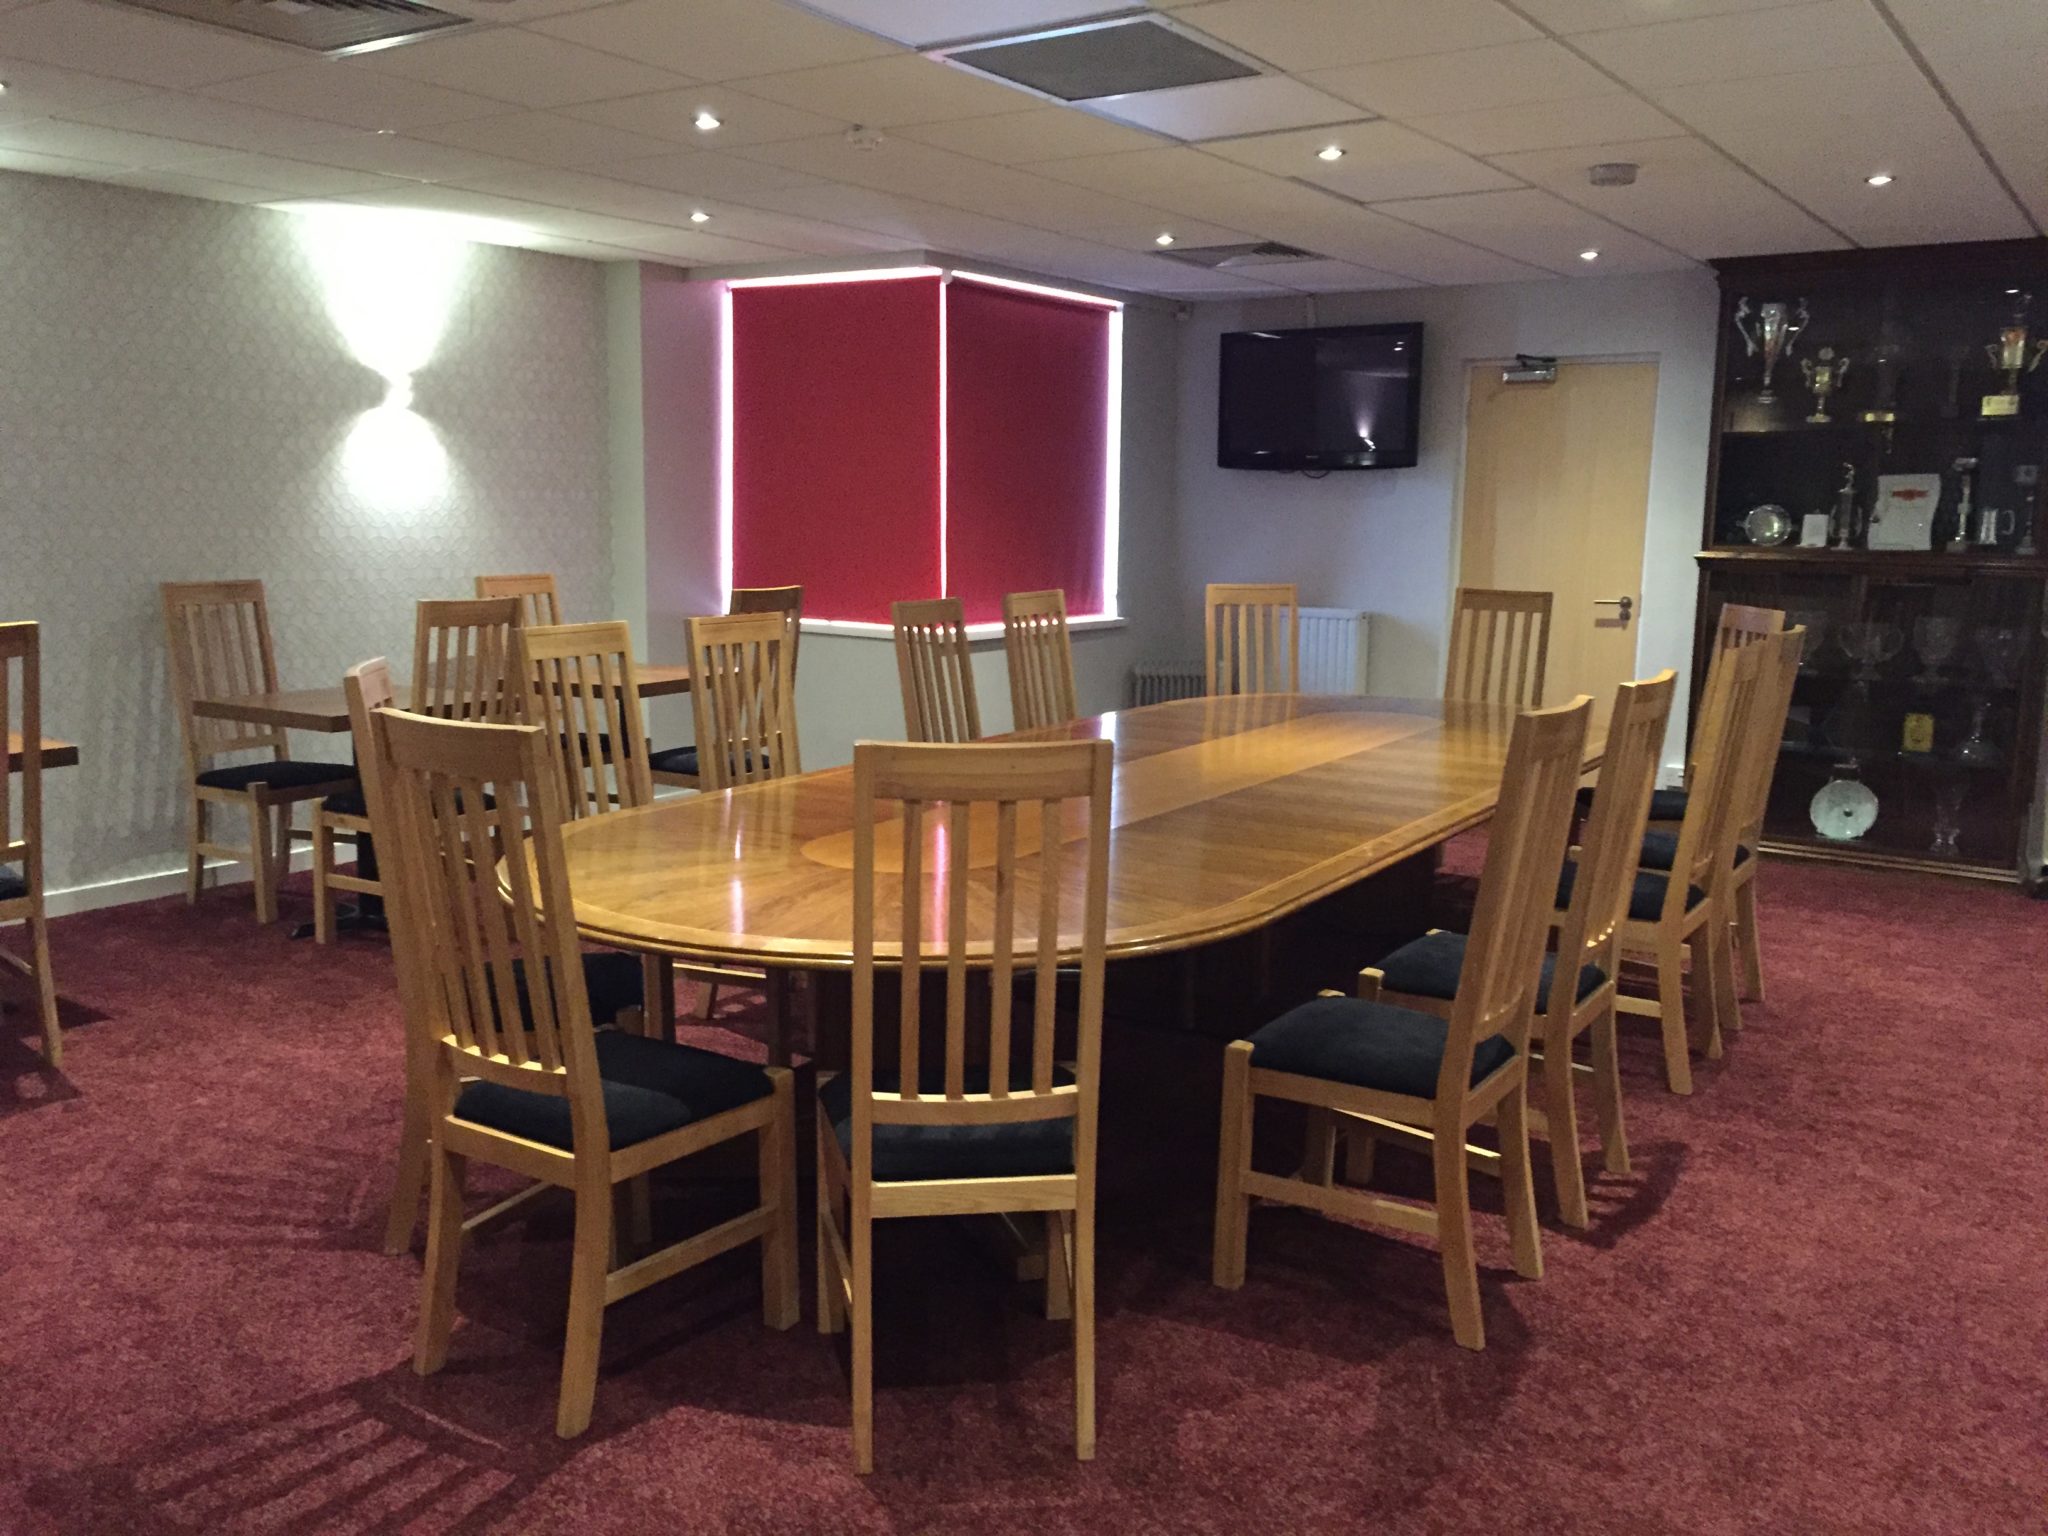 The Directors Lounge - walsall fc the venue